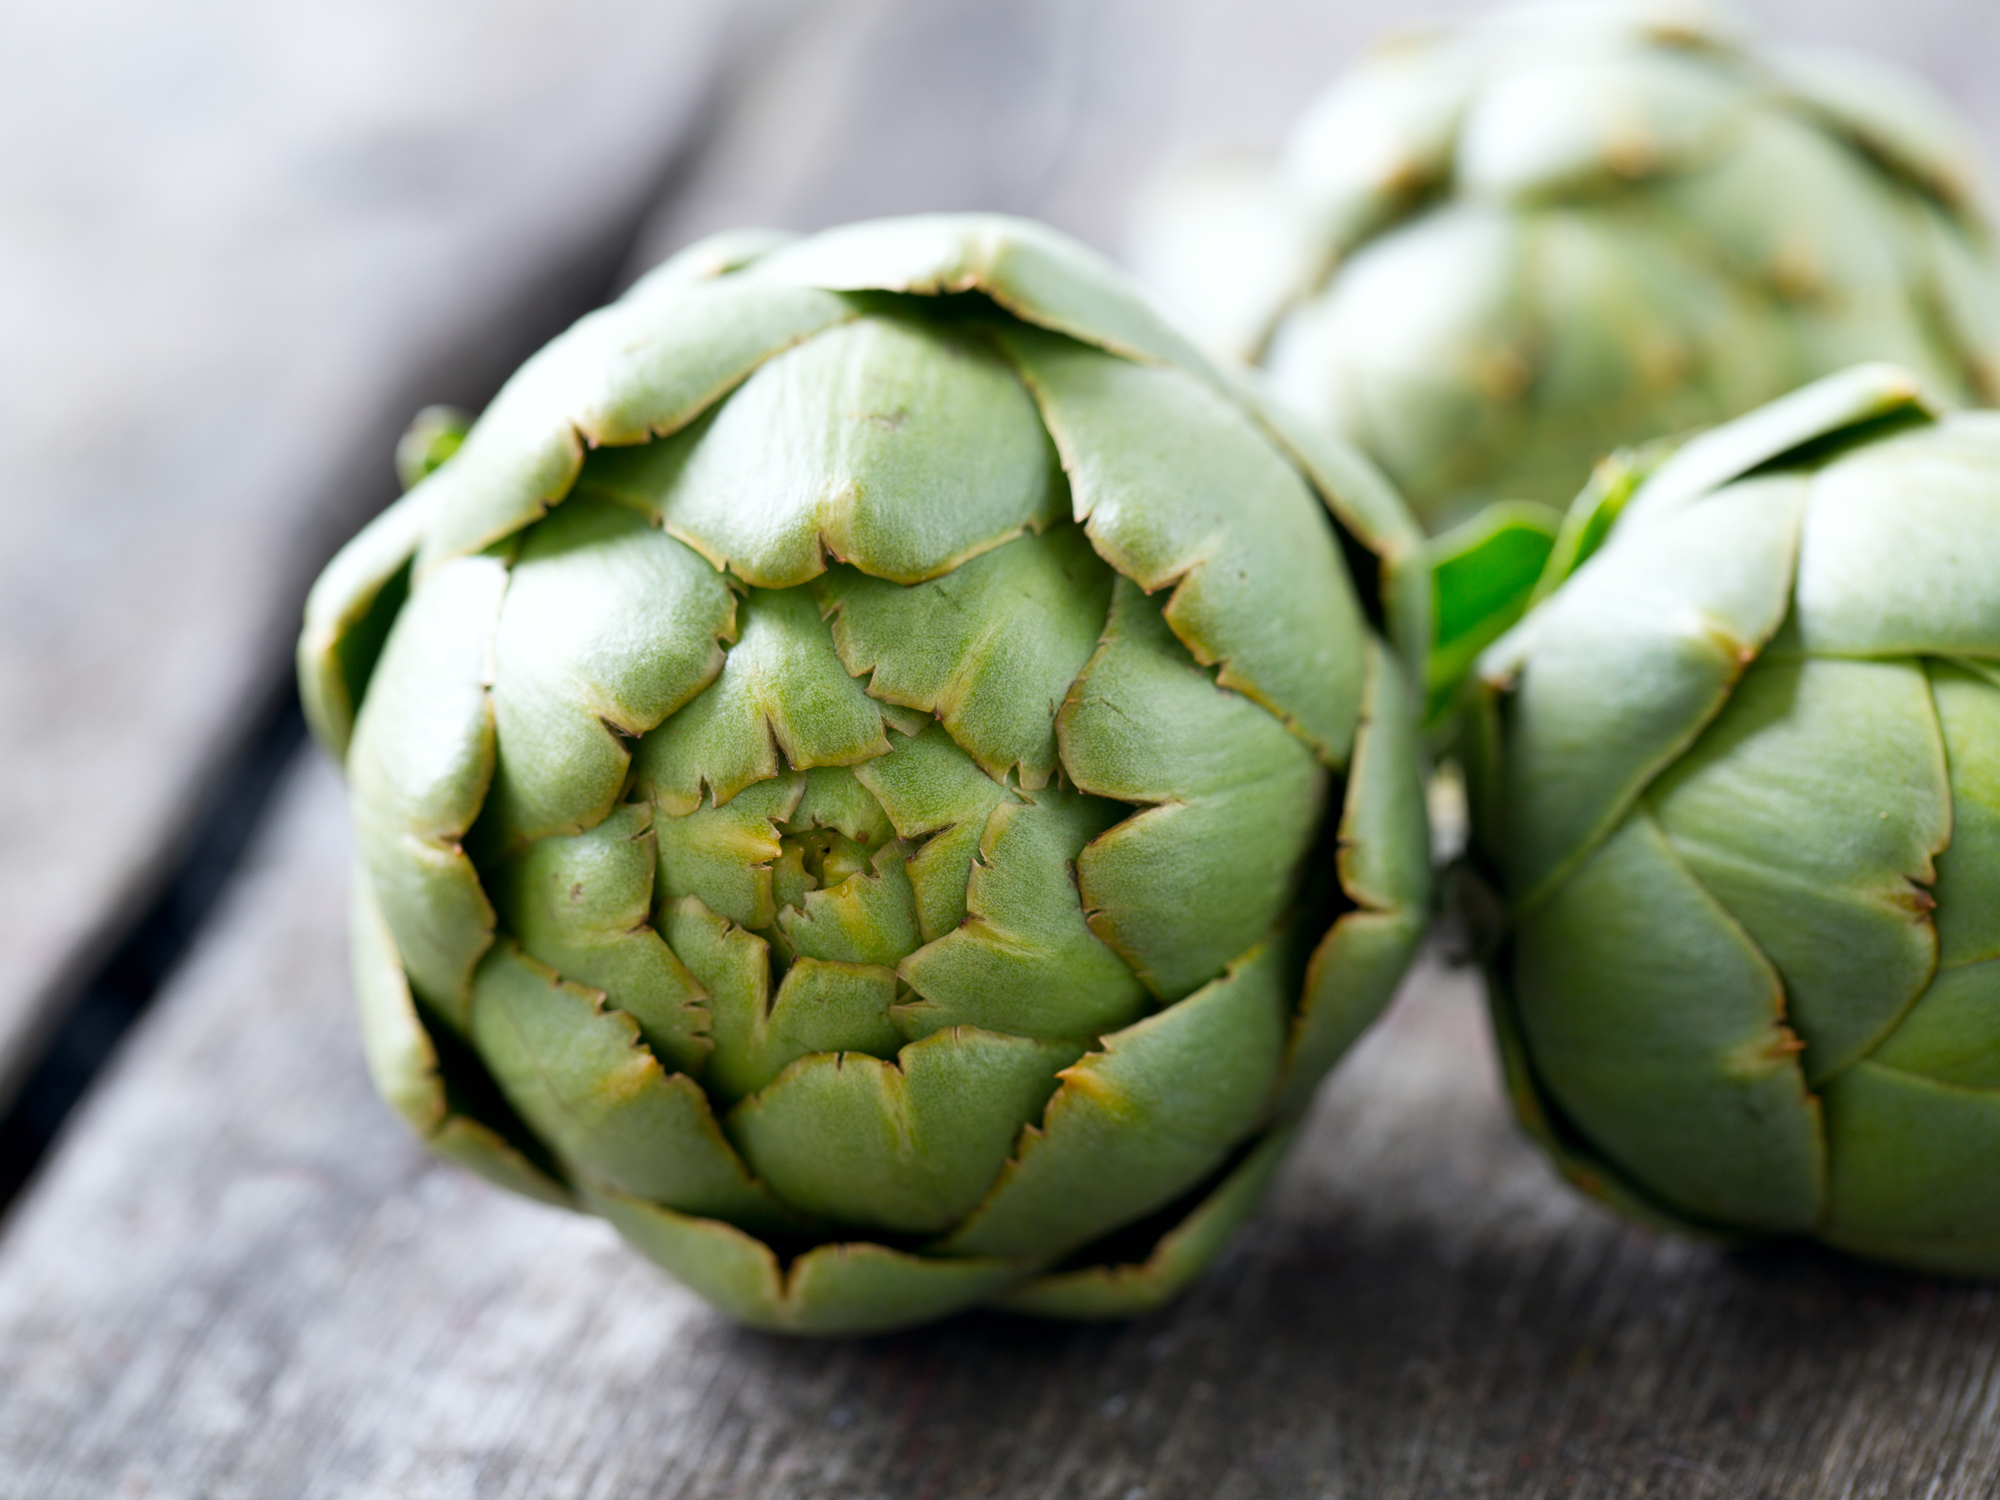 Artichokes get to the heart of cancer and liver protection